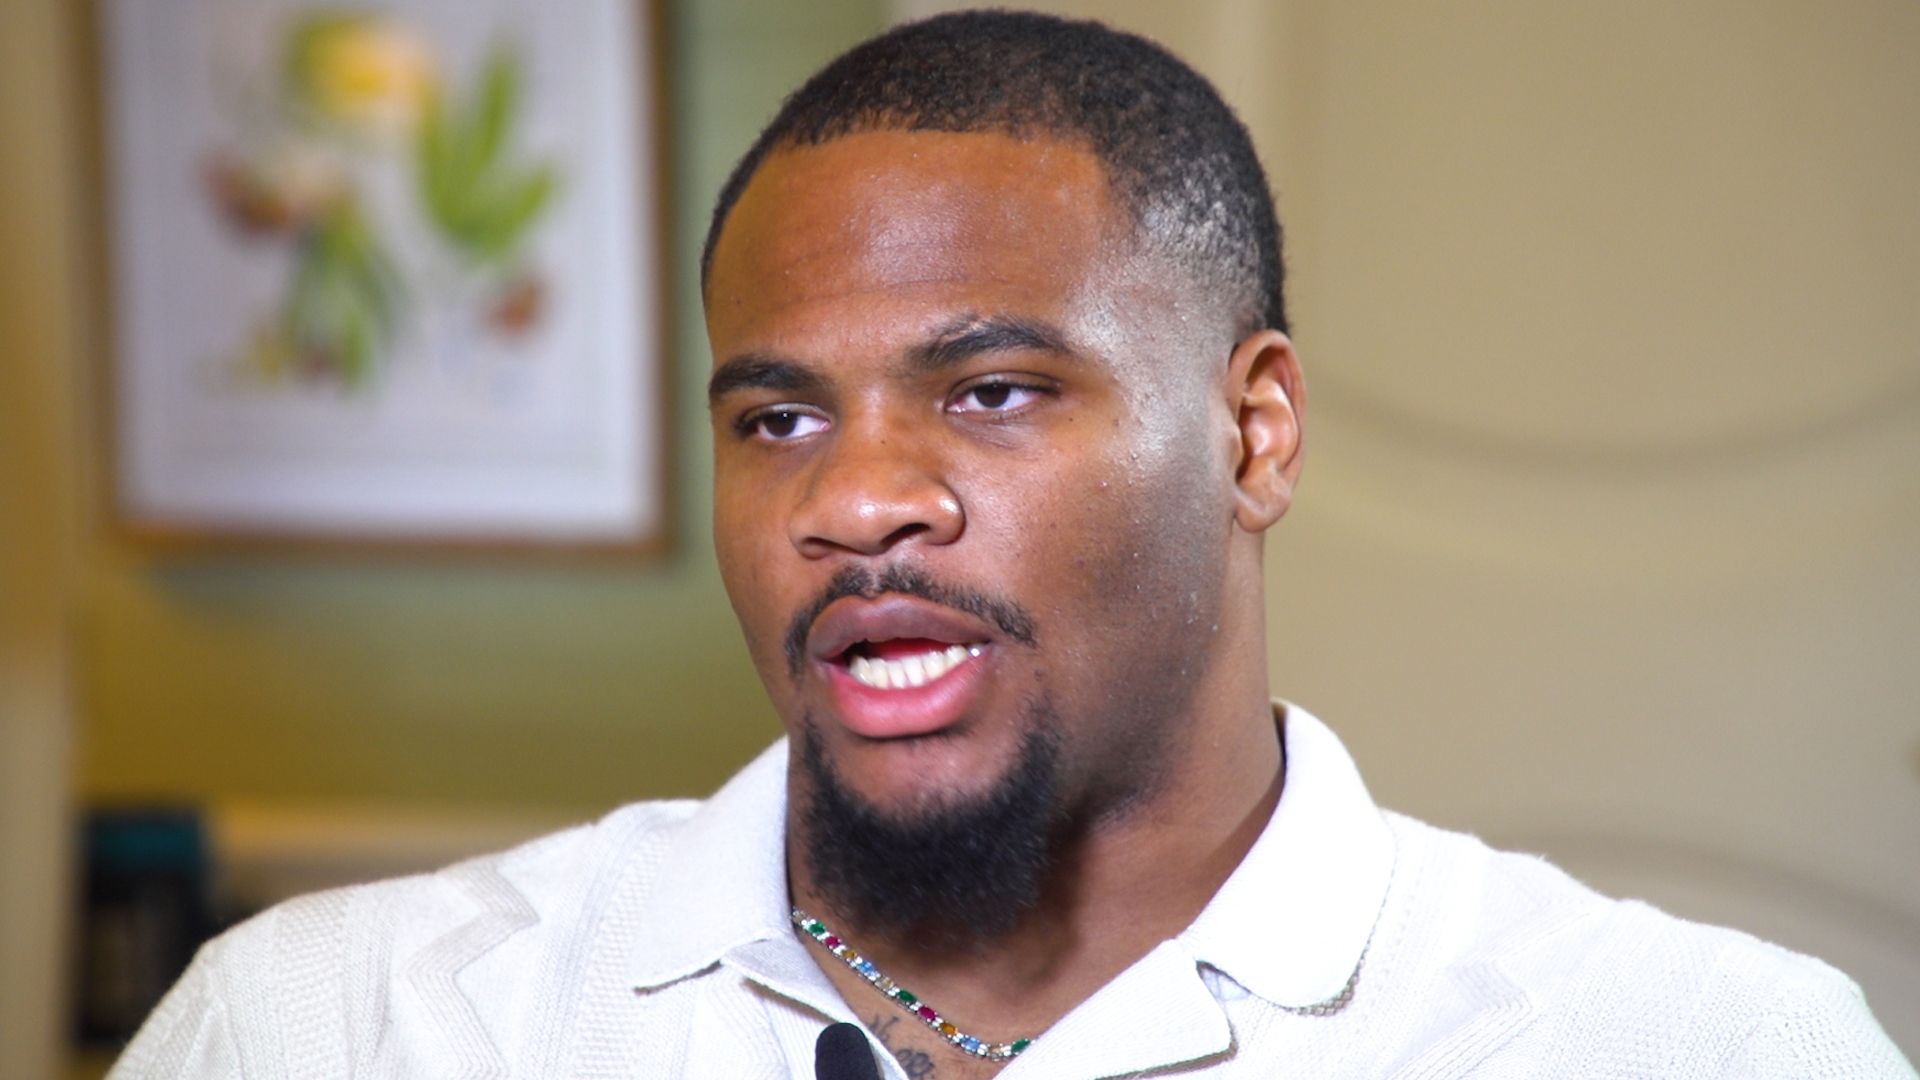 Dallas Cowboys LB Micah Parsons sat down with WFAA to talk about the need for change and accountability within the team. Here is his full interview.